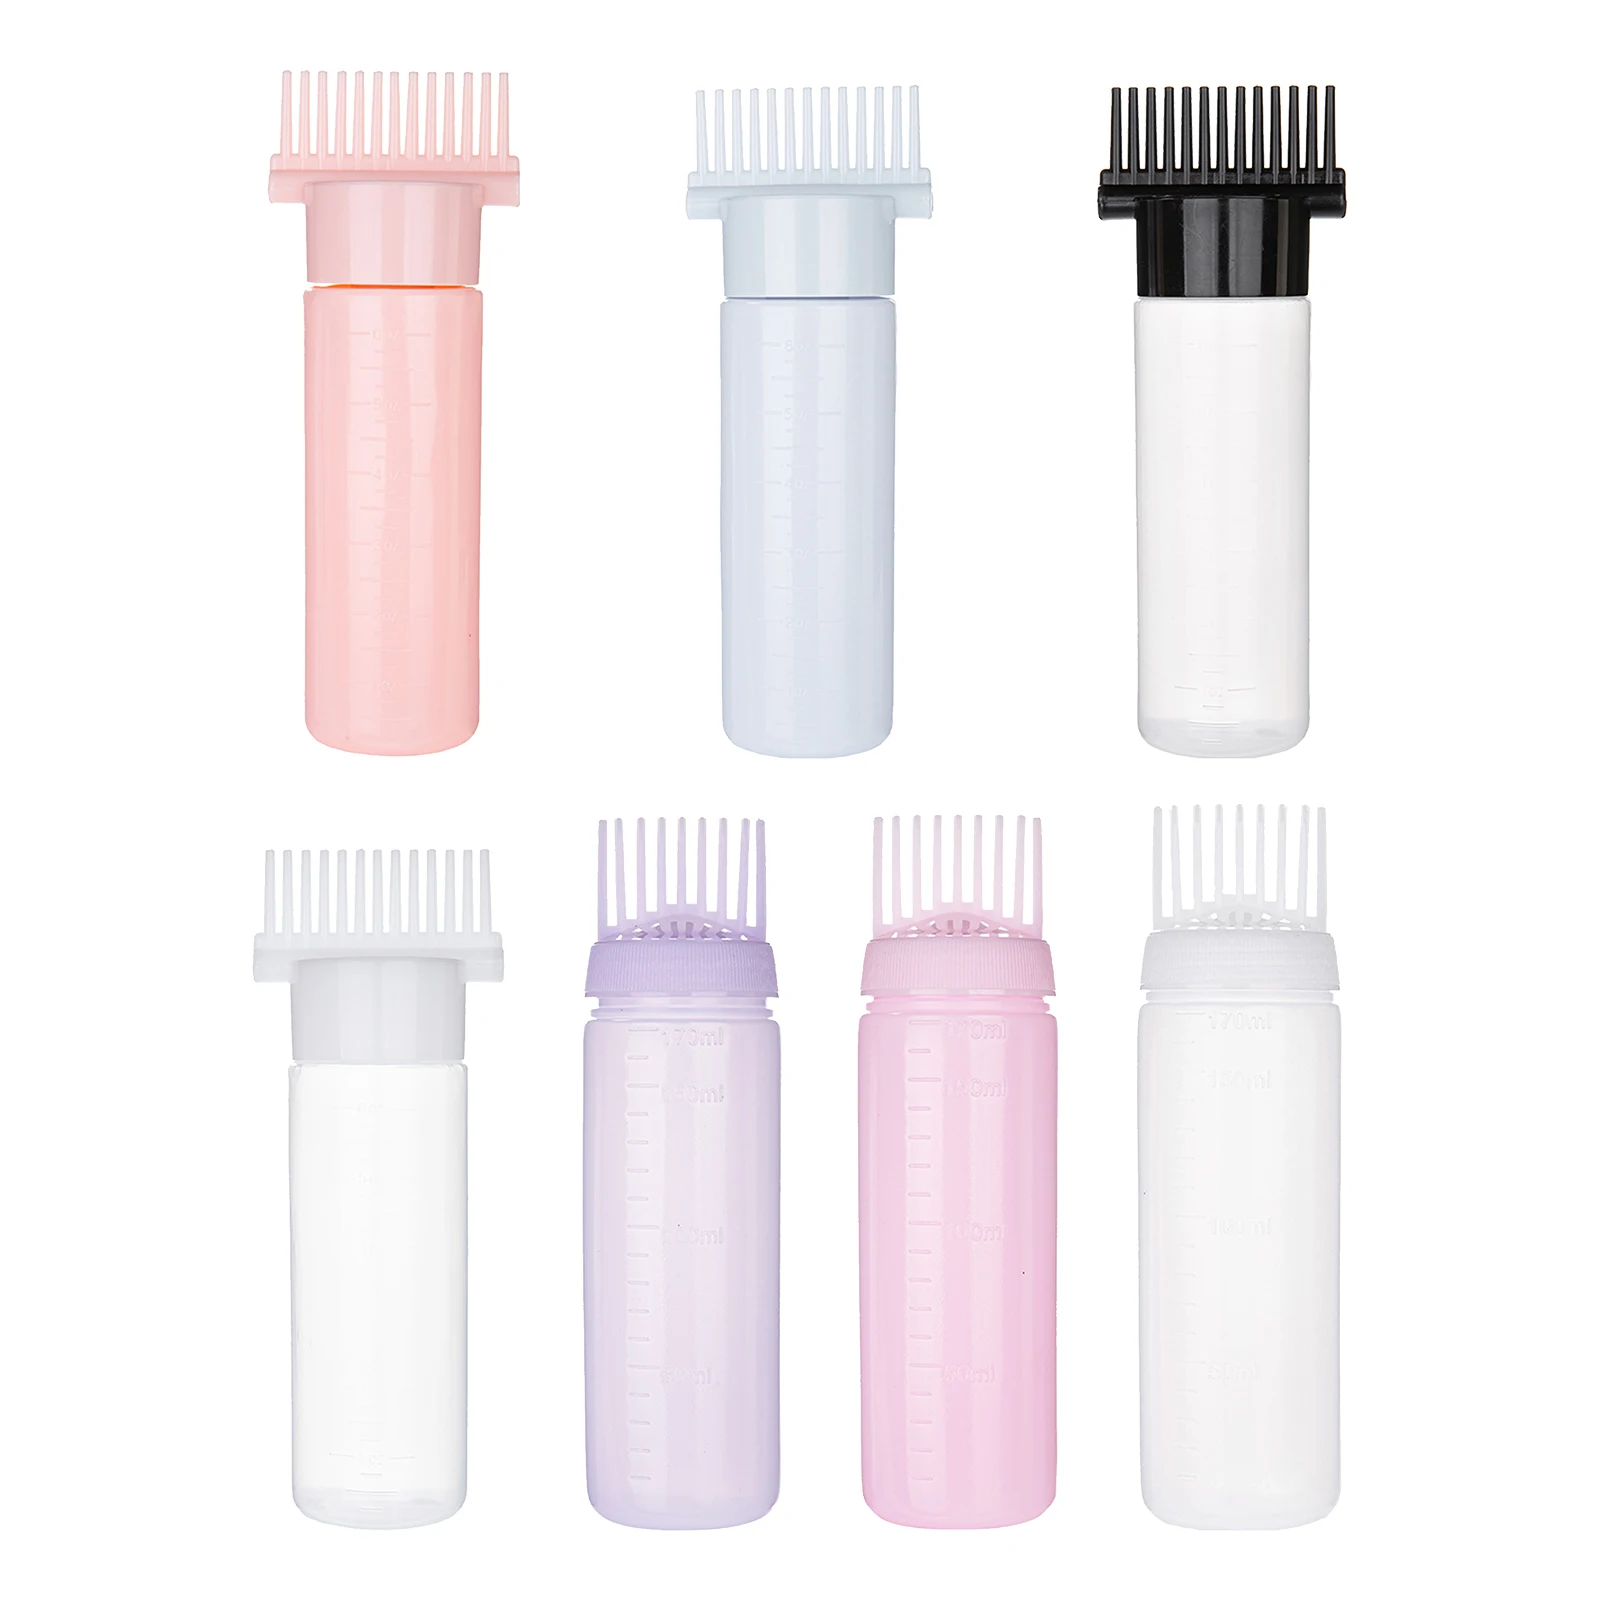 

1 Piece Root Comb Applicator Bottles, 2 ounce 180ml Hair Coloring, Dyeing and Scalp Treatment Essential Salon Hairdressing Tool